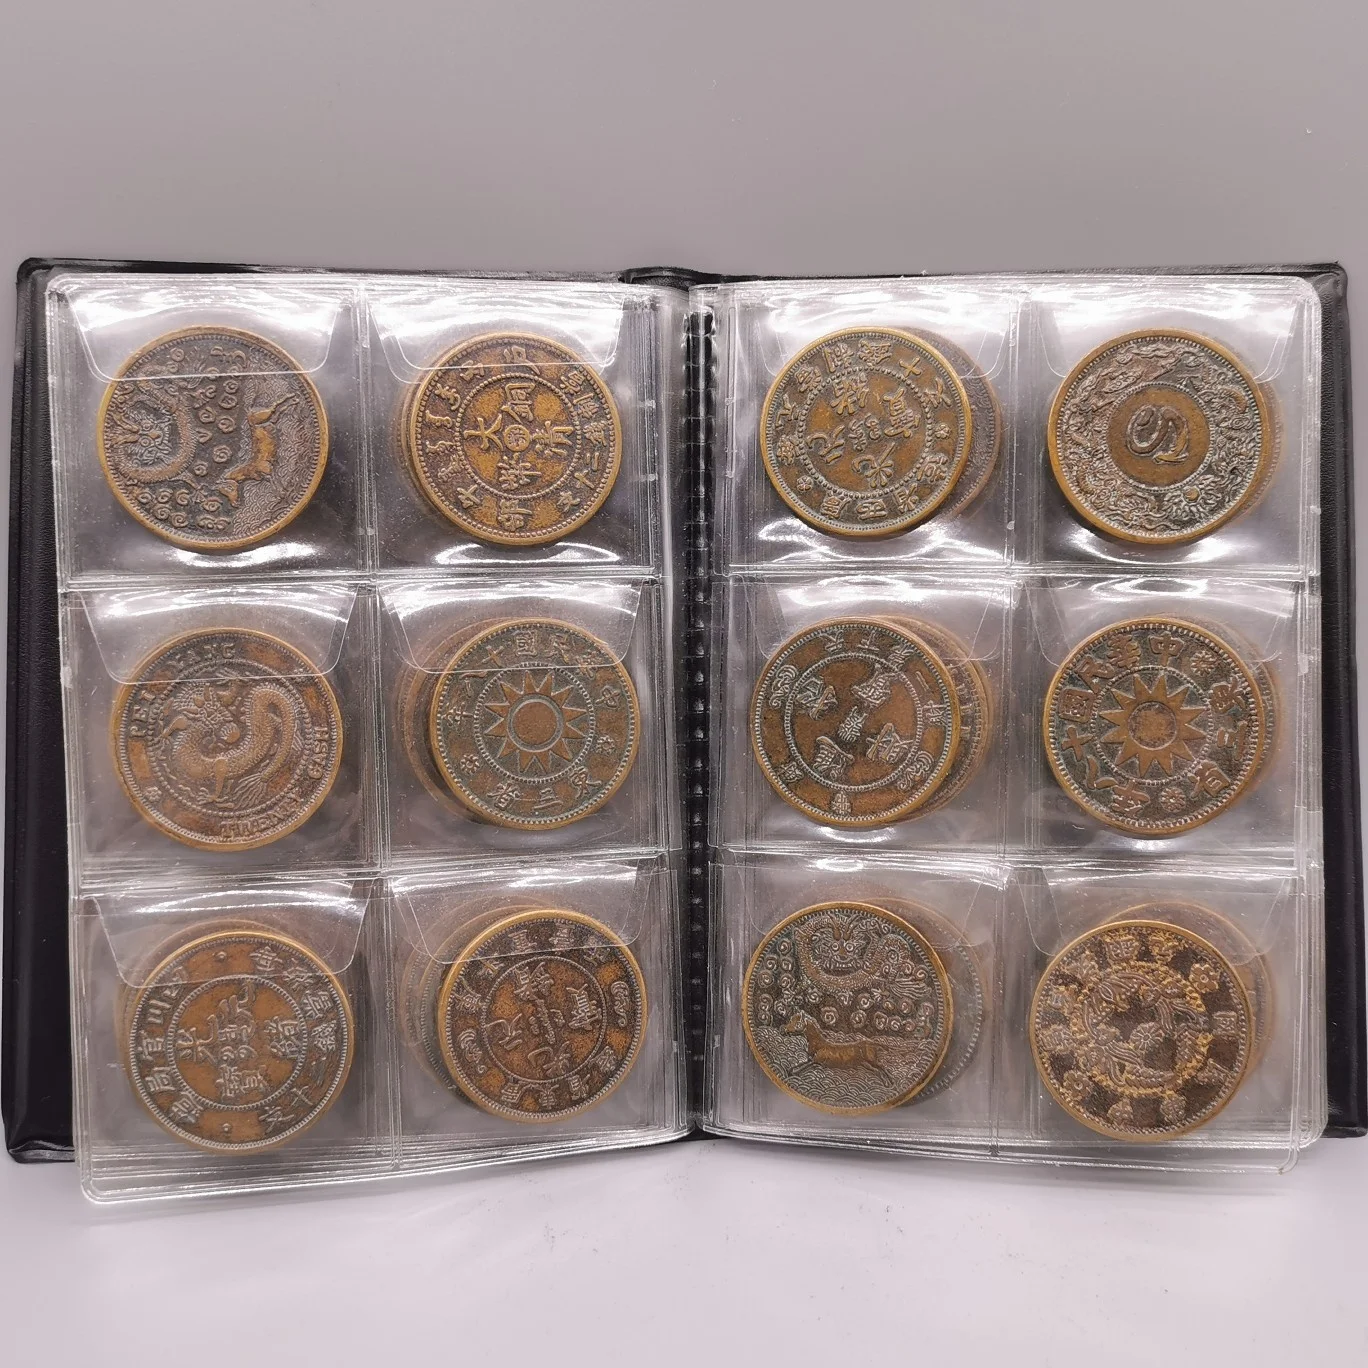 

Collect Ancient China Copper Coin,Silver Dollar Set, Metal Handicraft Home Decoration